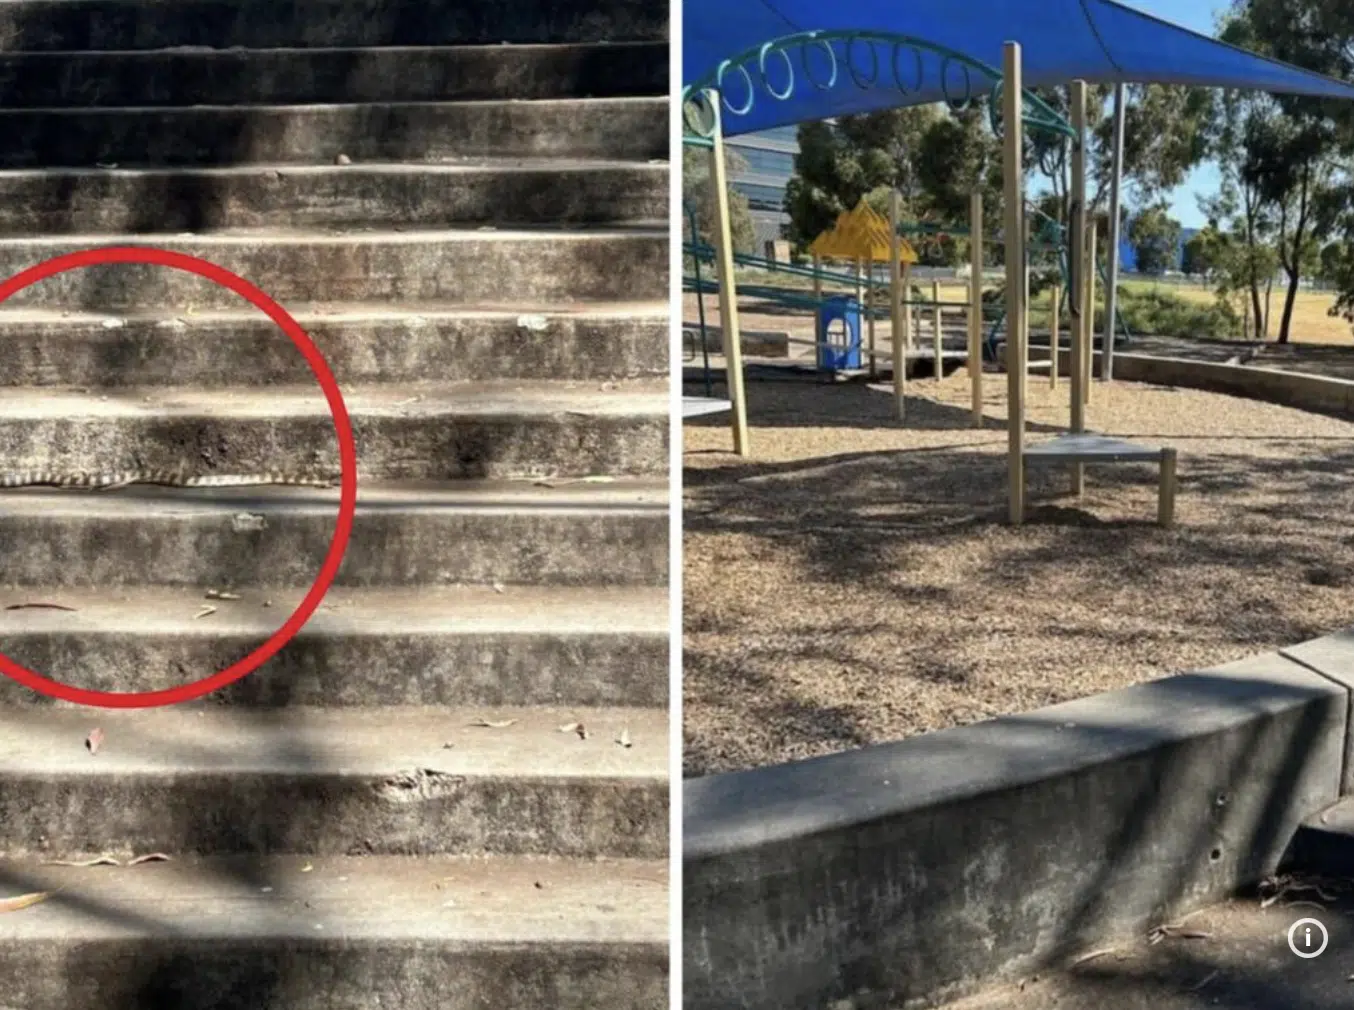 Venomous tiger snake spotted metres from playground in Melbourne